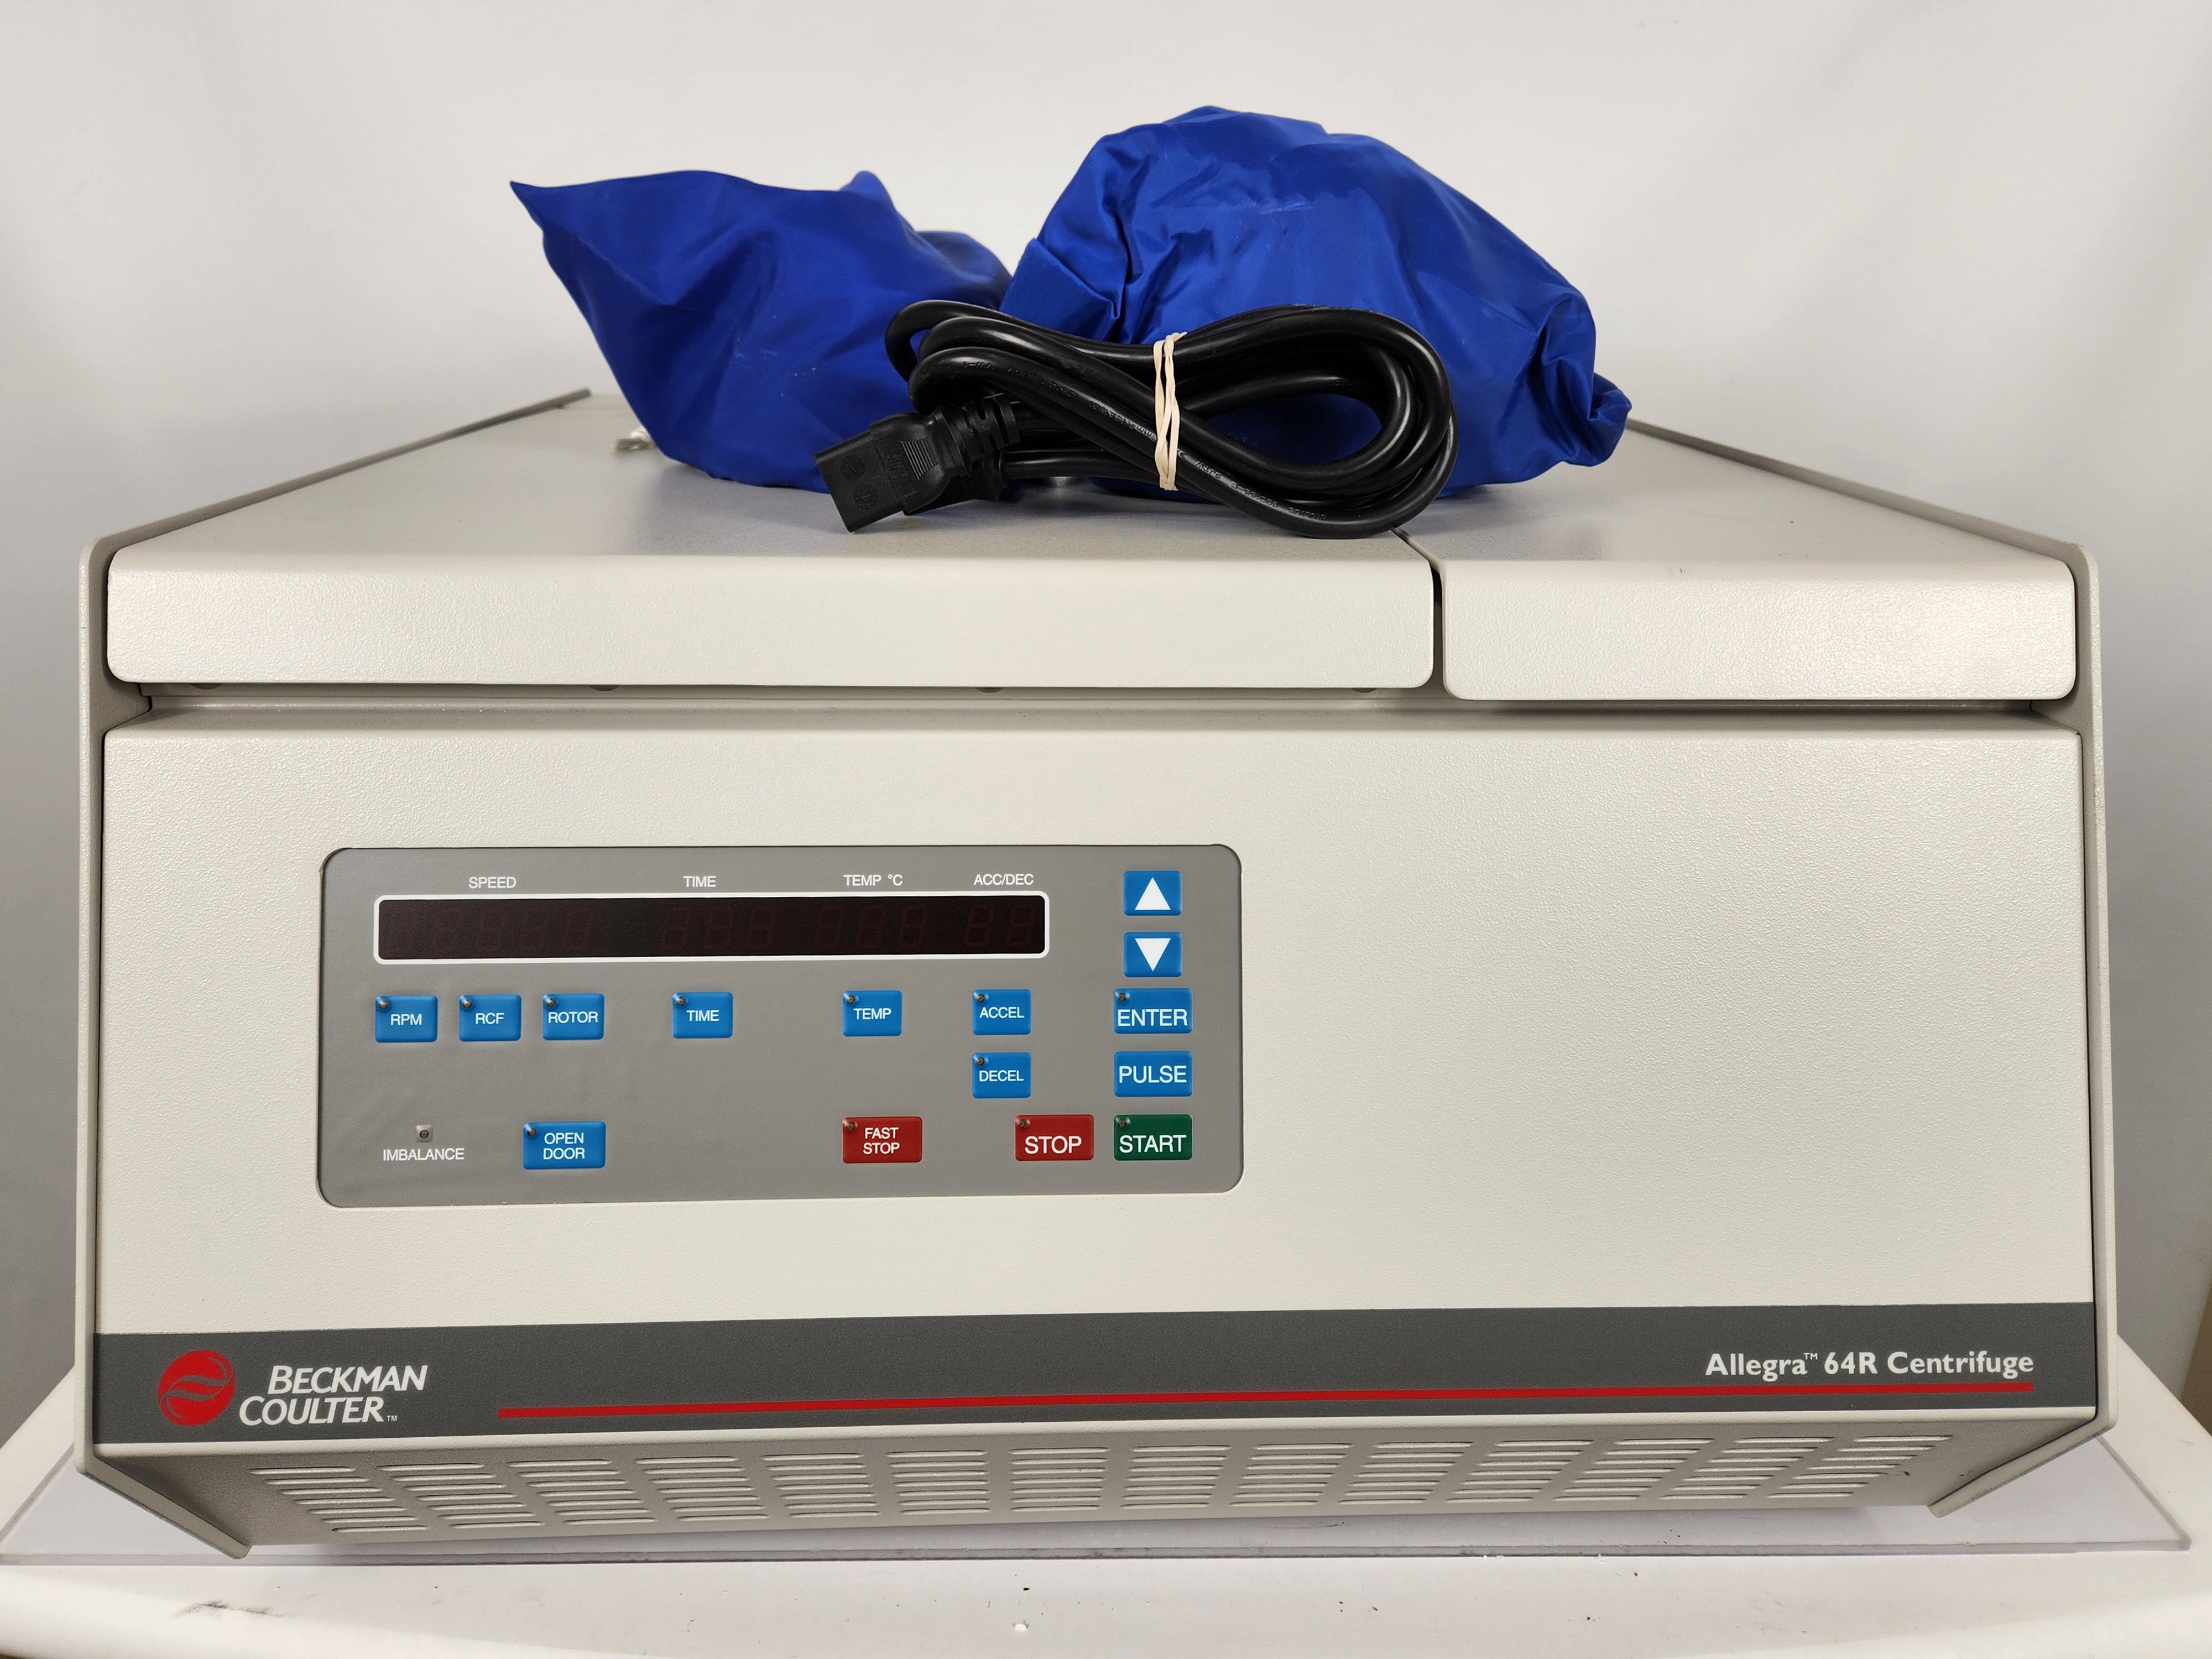 Beckman Coulter Allegra 64R Benchtop Centrifuge with F0650 and F1010 Rotors